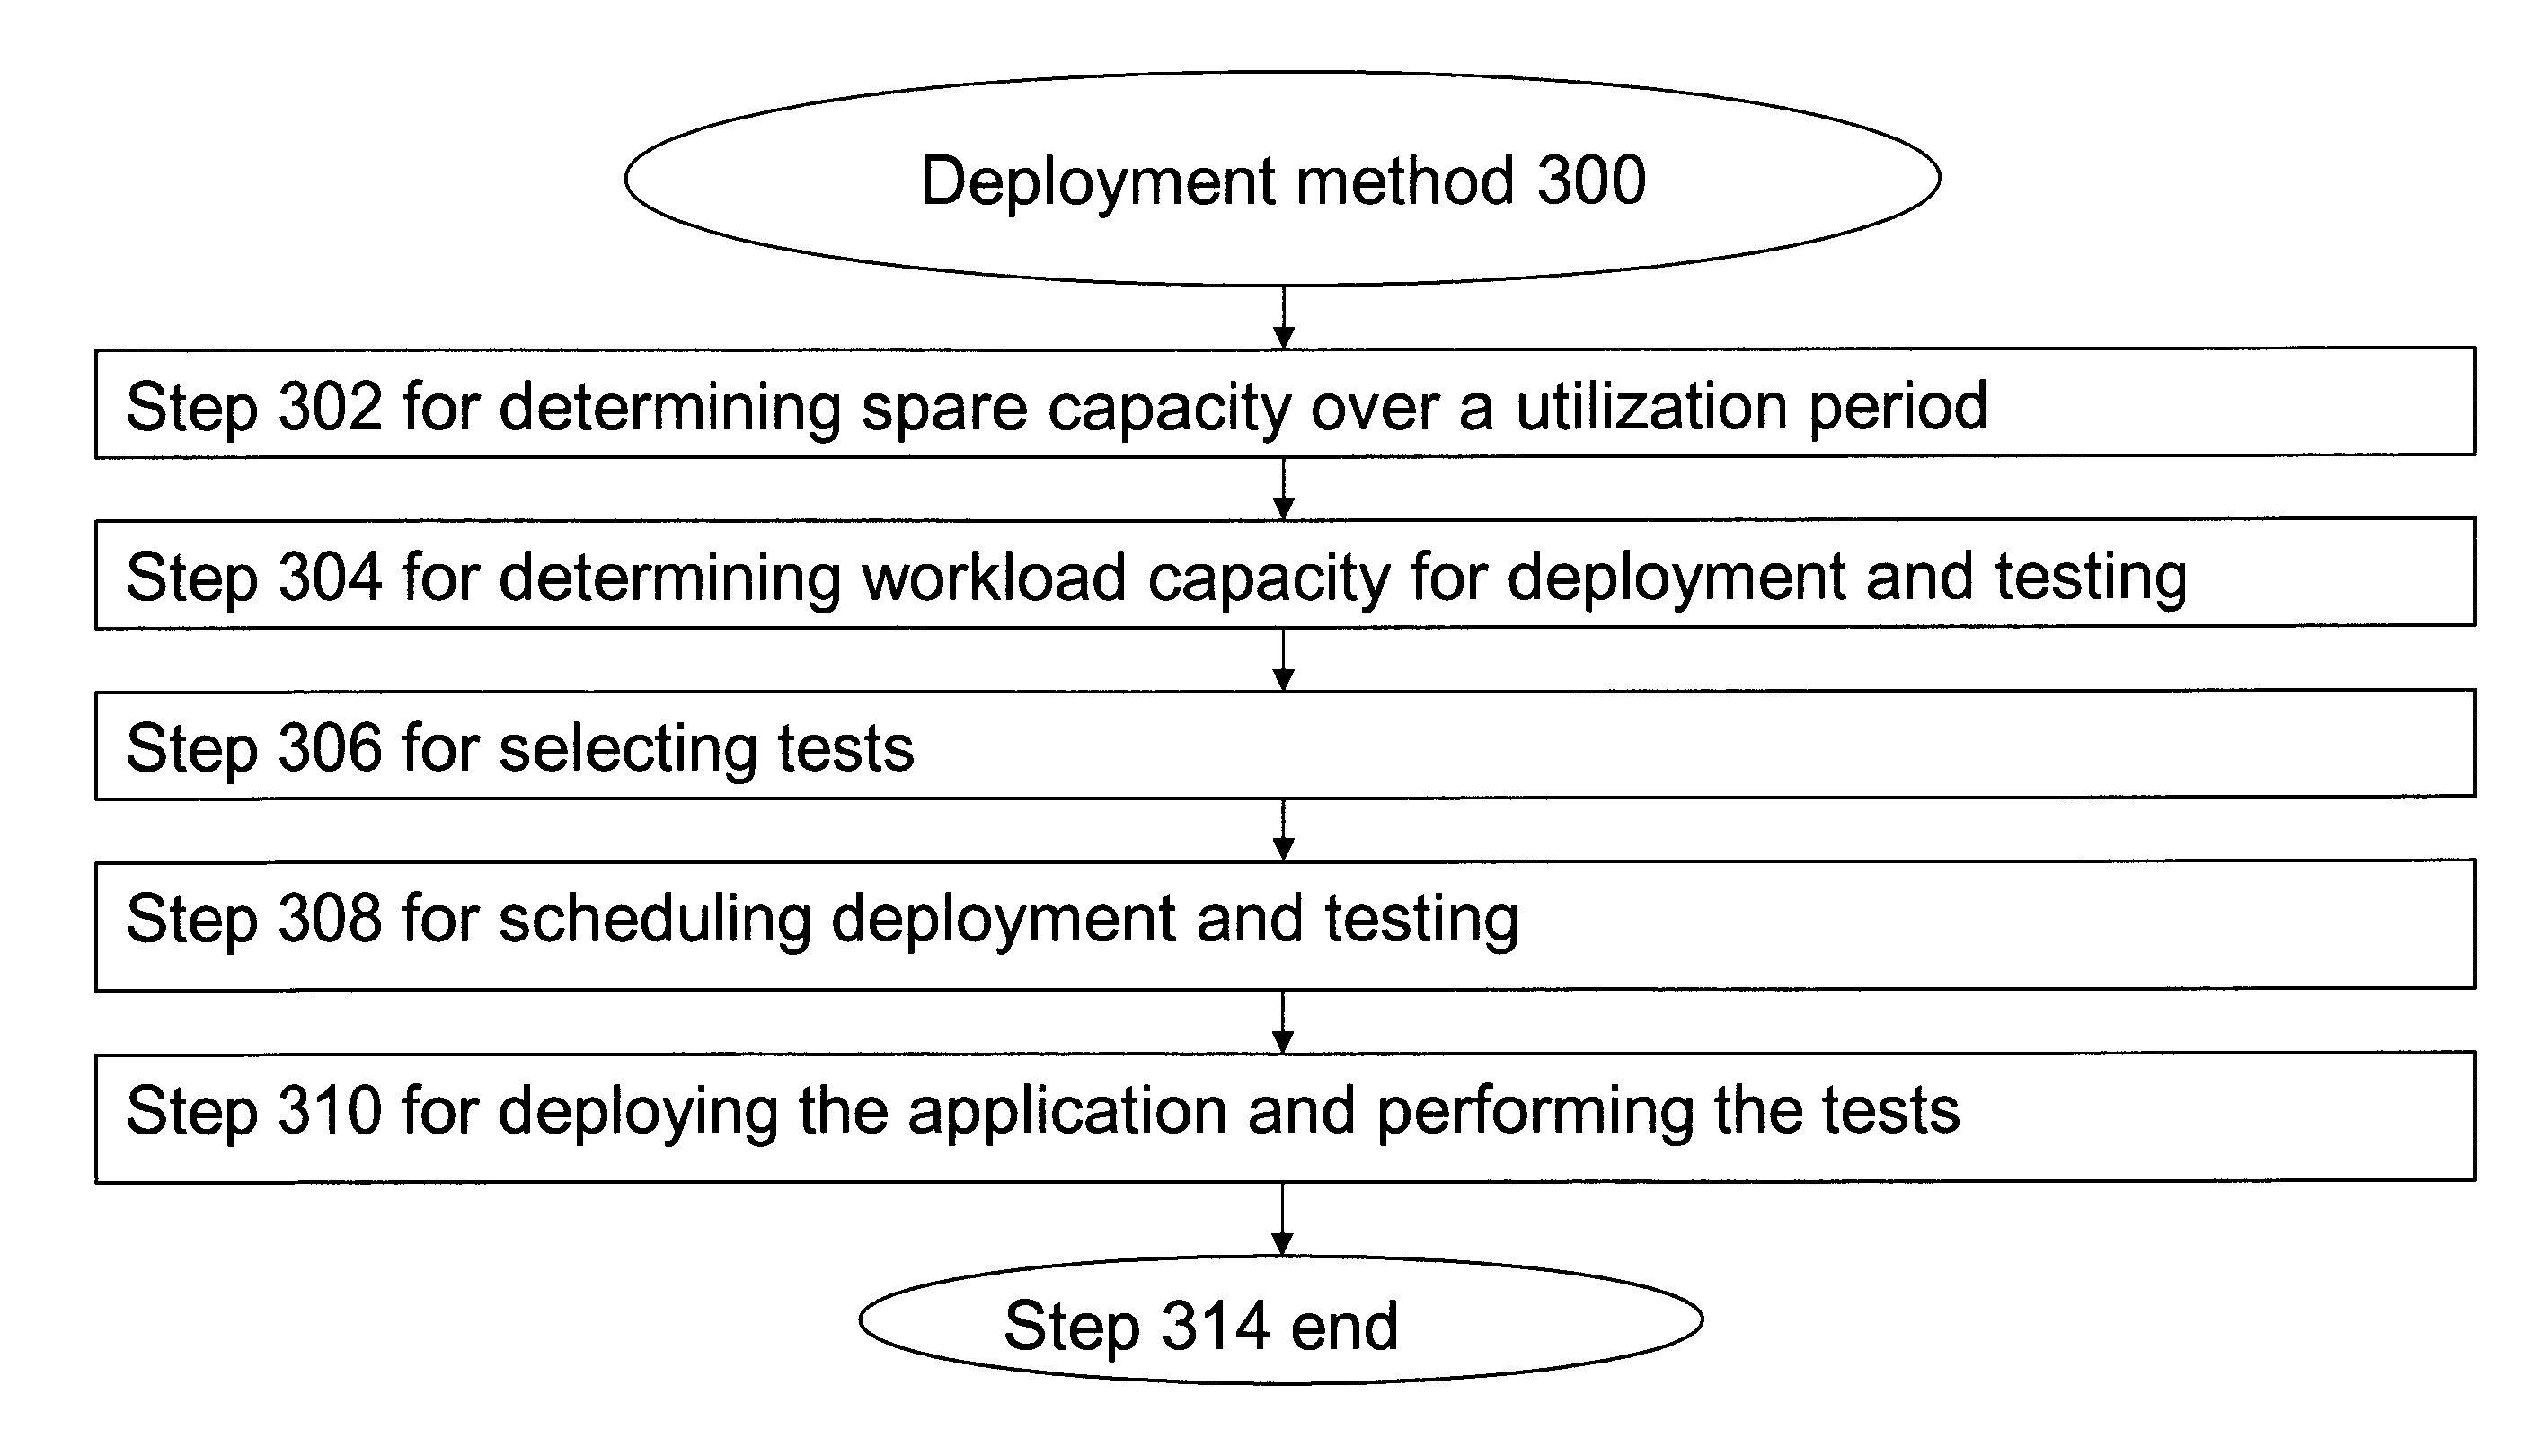 Installing and Testing an Application on a Highly Utilized Computer Platform